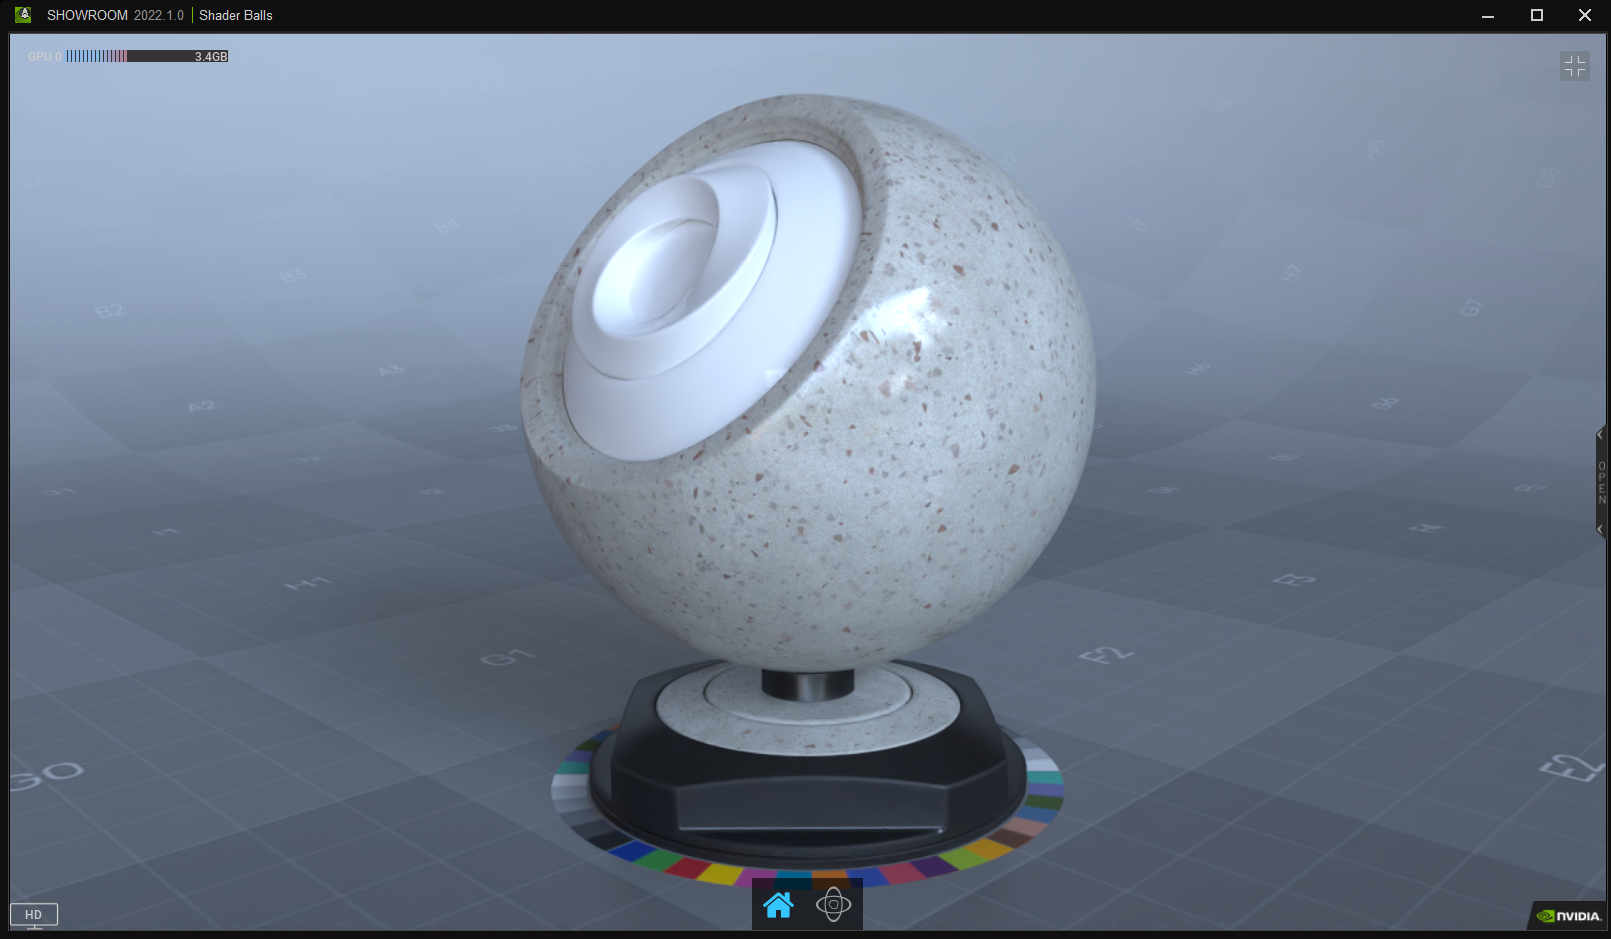 Demo animation with various materials rendering on a ball